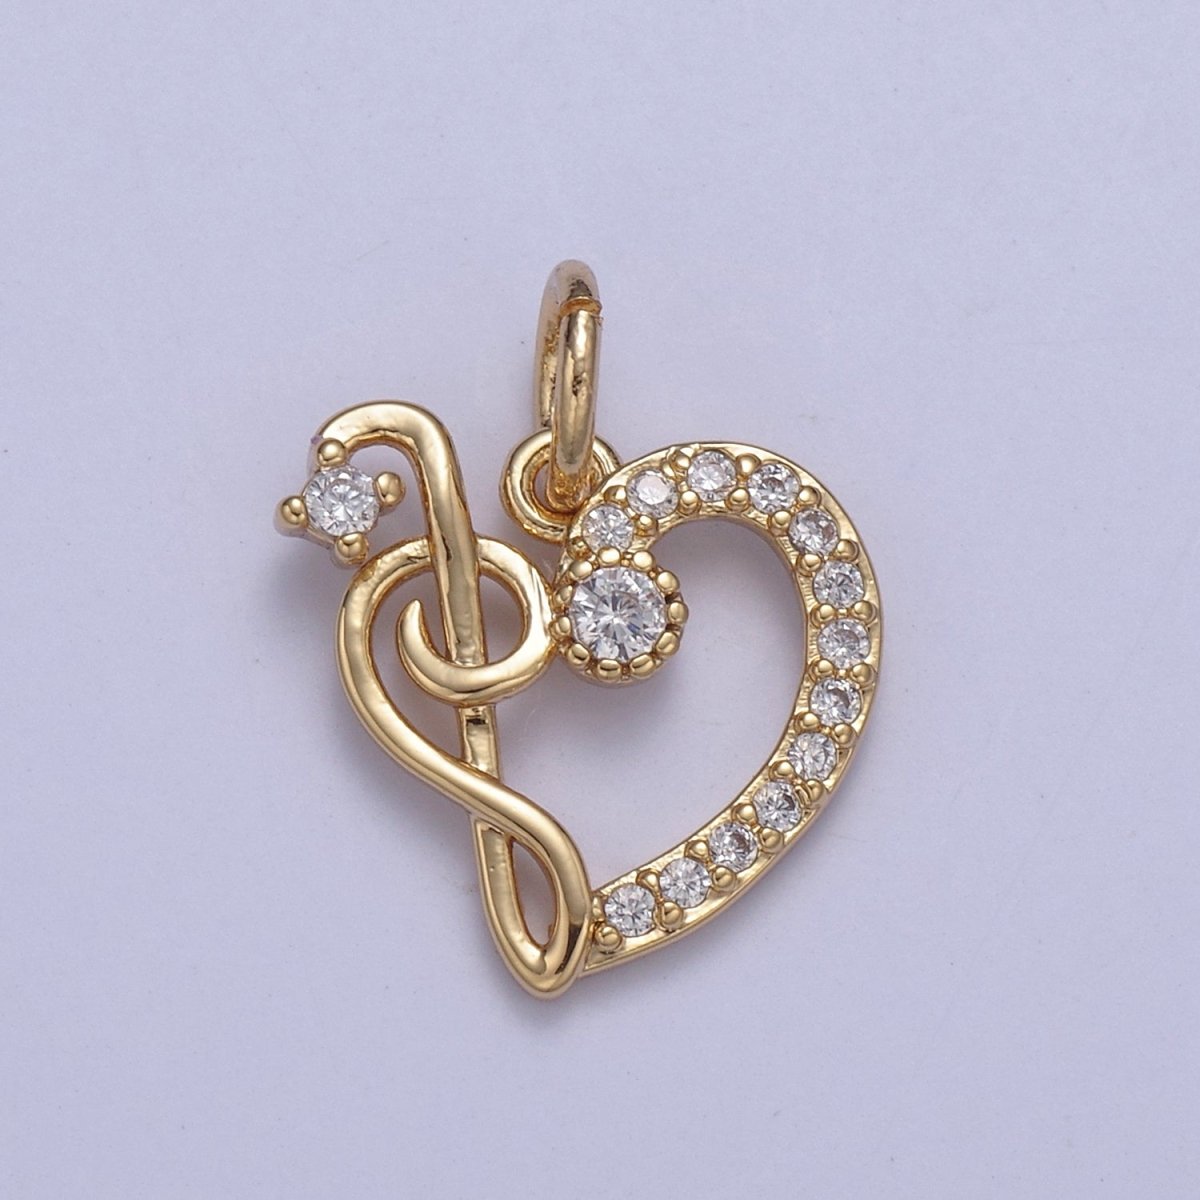 16K Gold Filled Dainty Micro pave Heart Charm, Love Inspired Tiny Heart Ornament Charm N-430 - DLUXCA